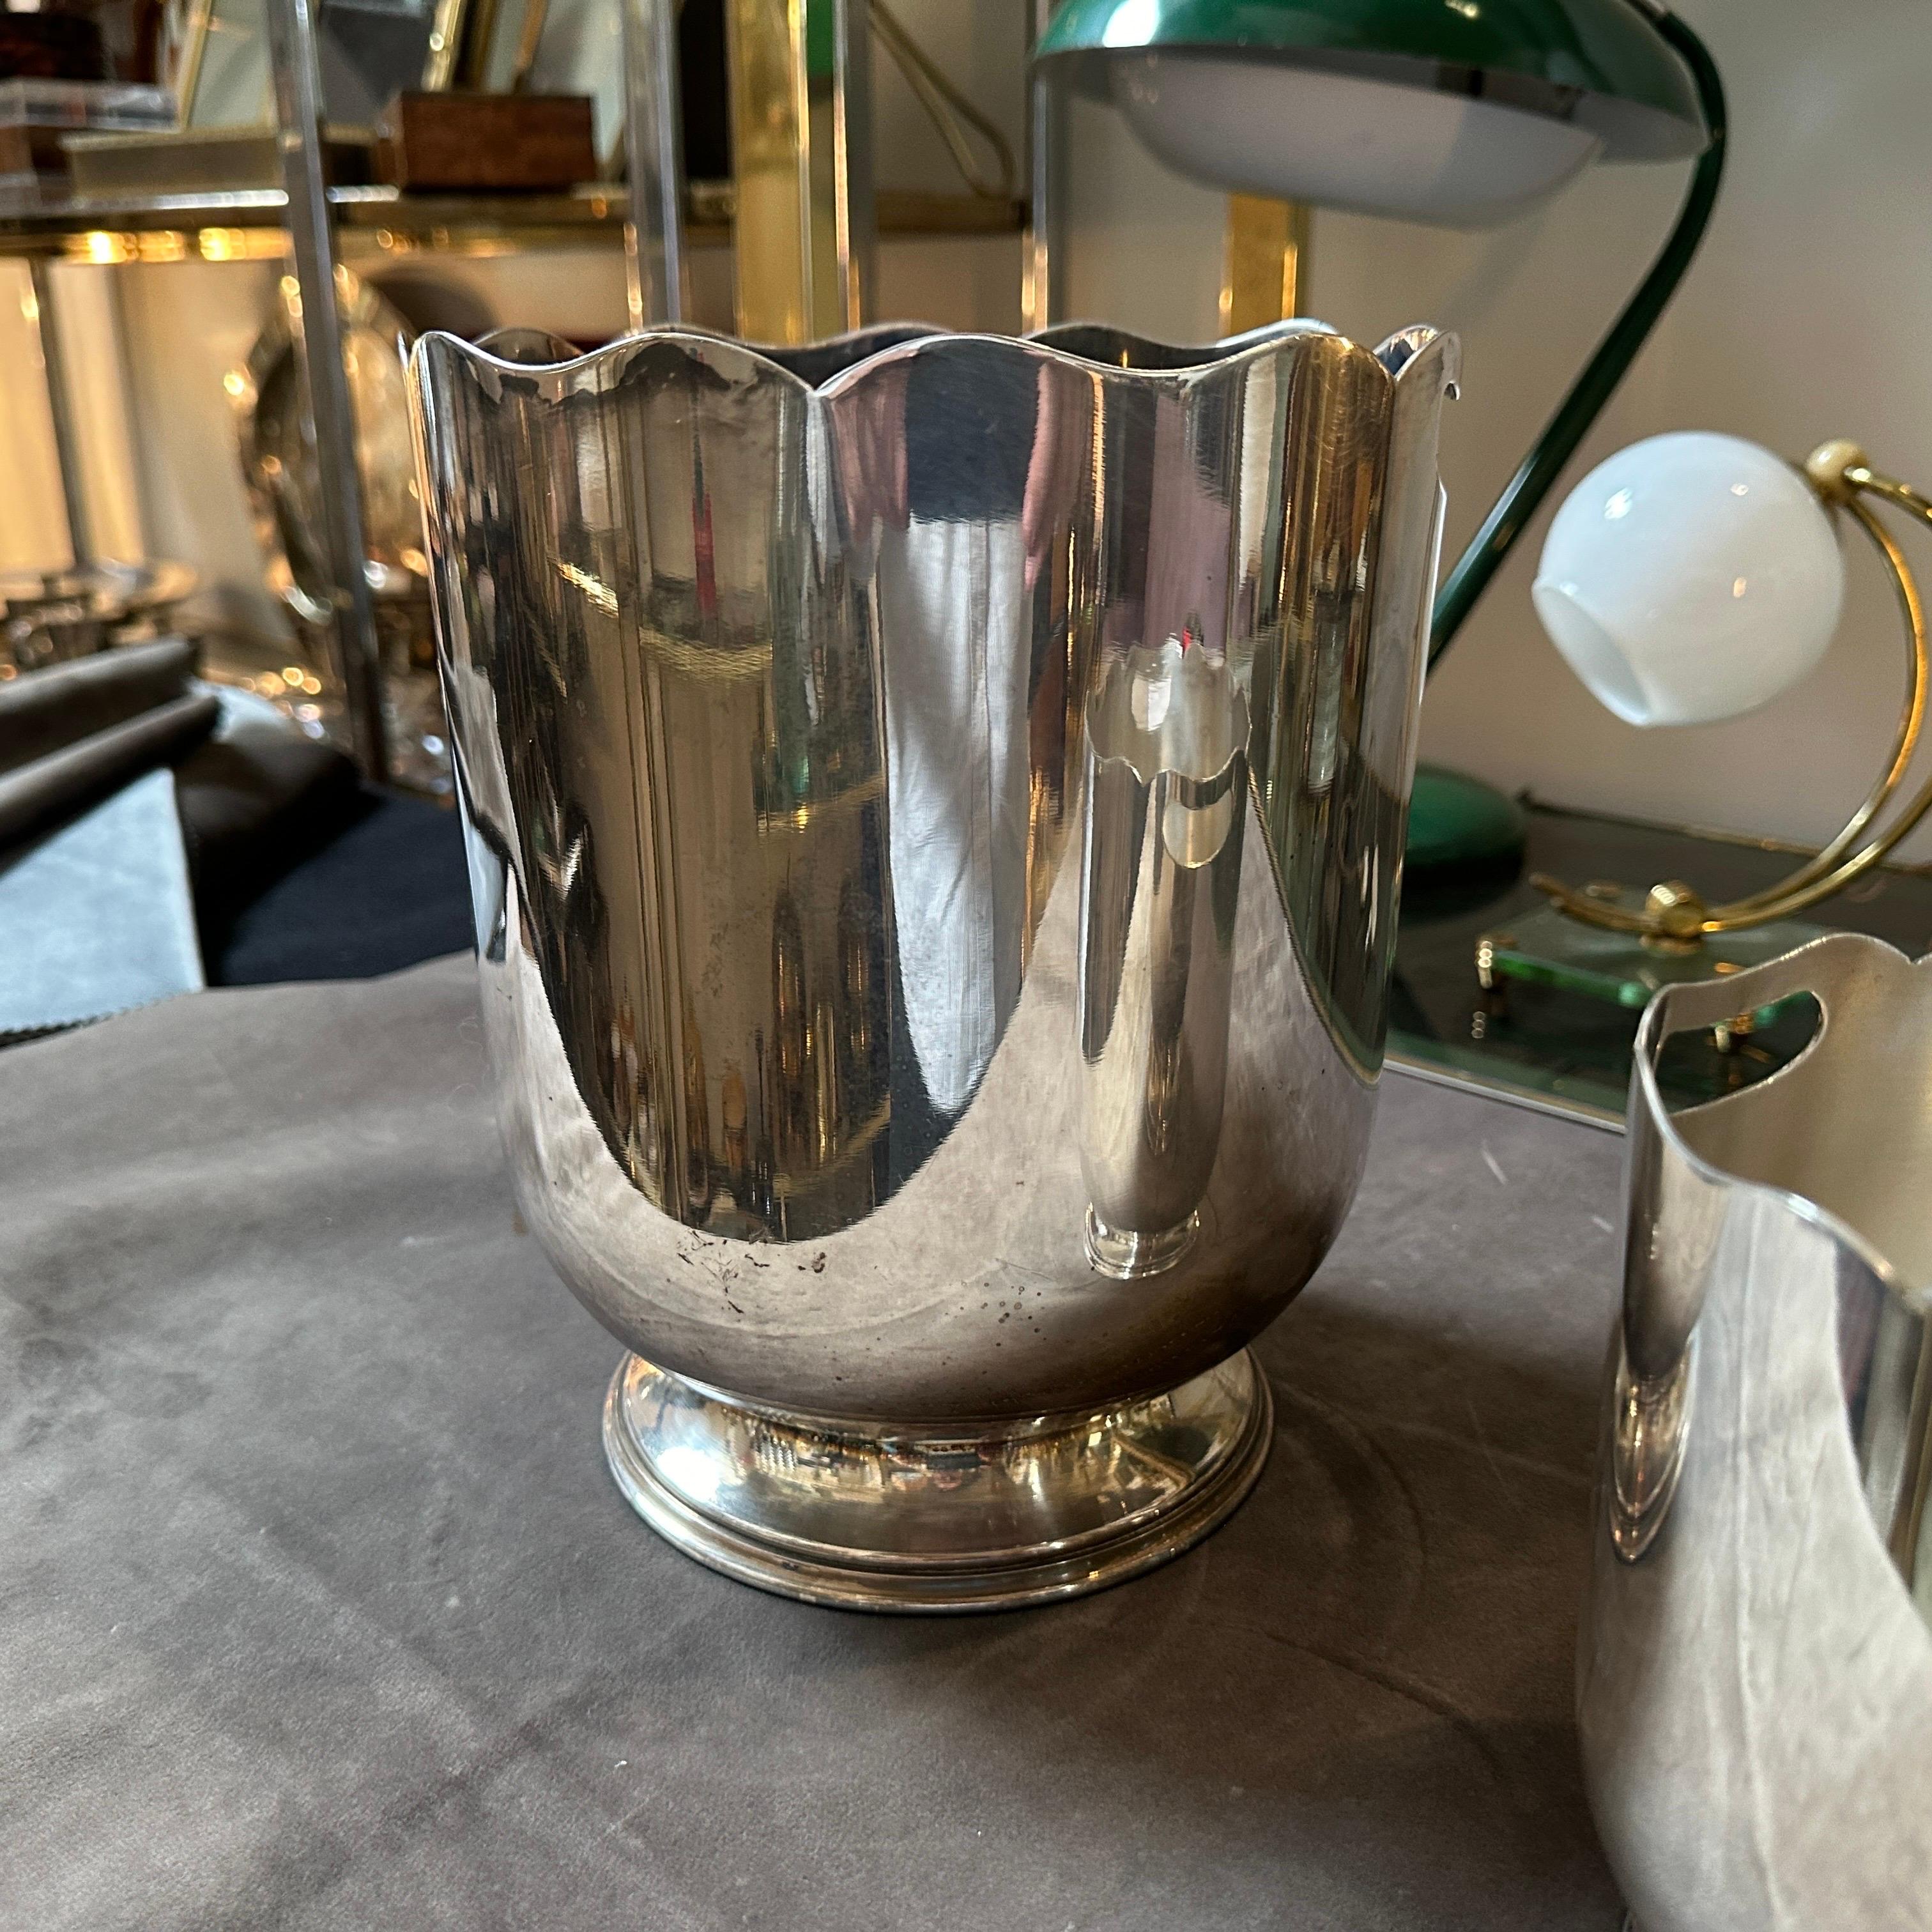 1970s Mid-Century Modern Silver Plated French Set of Wine Cooler and Ice Bucket For Sale 2